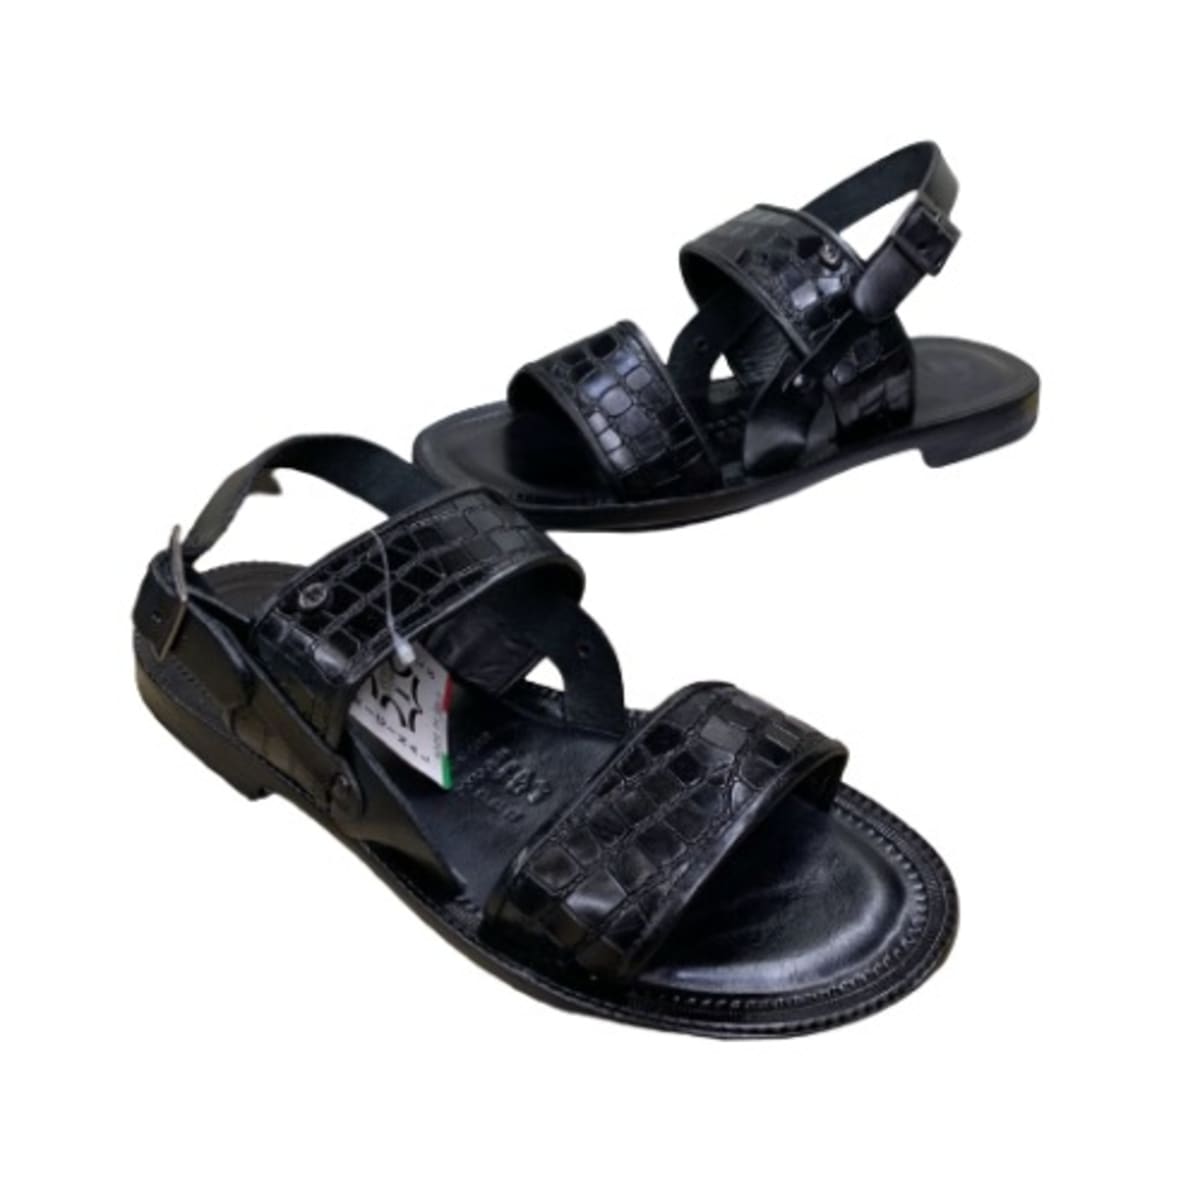 Share more than 166 mens white leather dress sandals